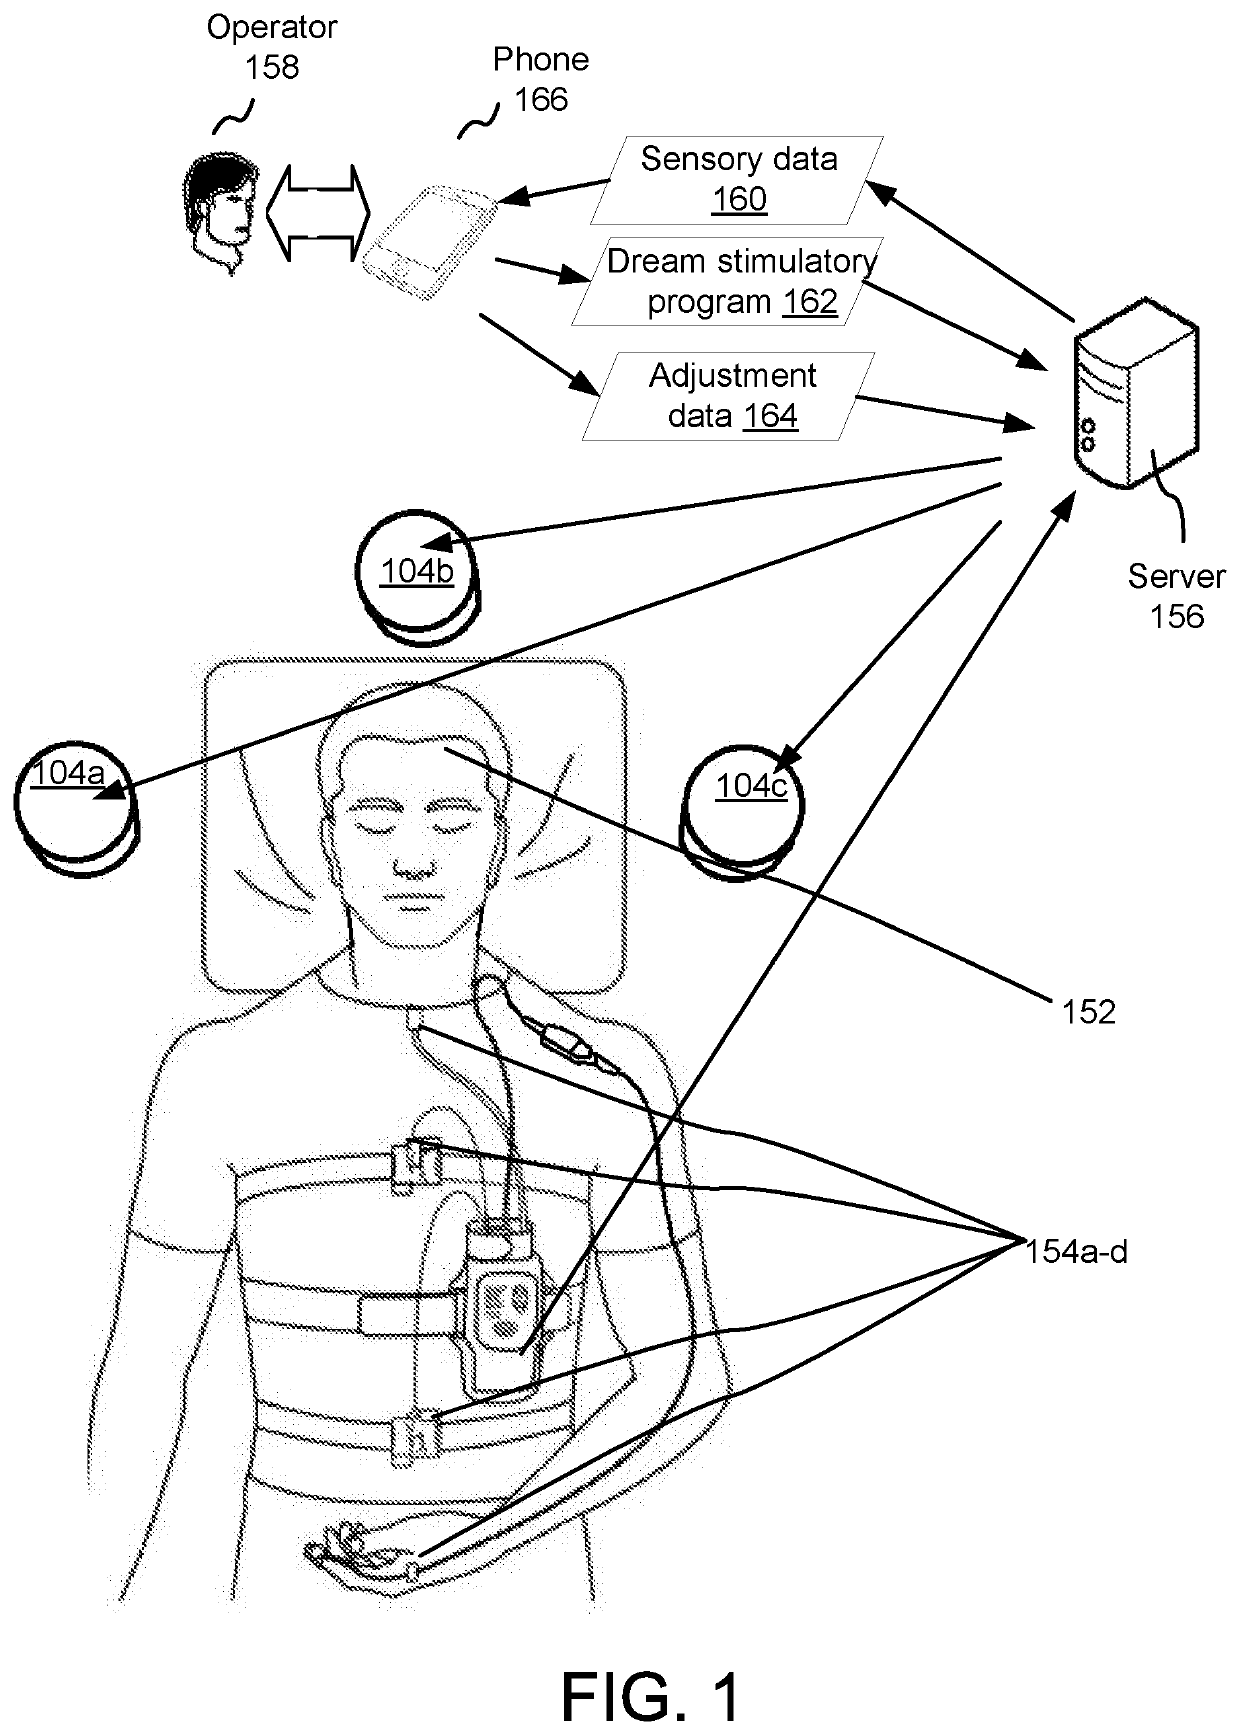 Low-powered electromagnetic brain stimulation dreaming apparatus and method